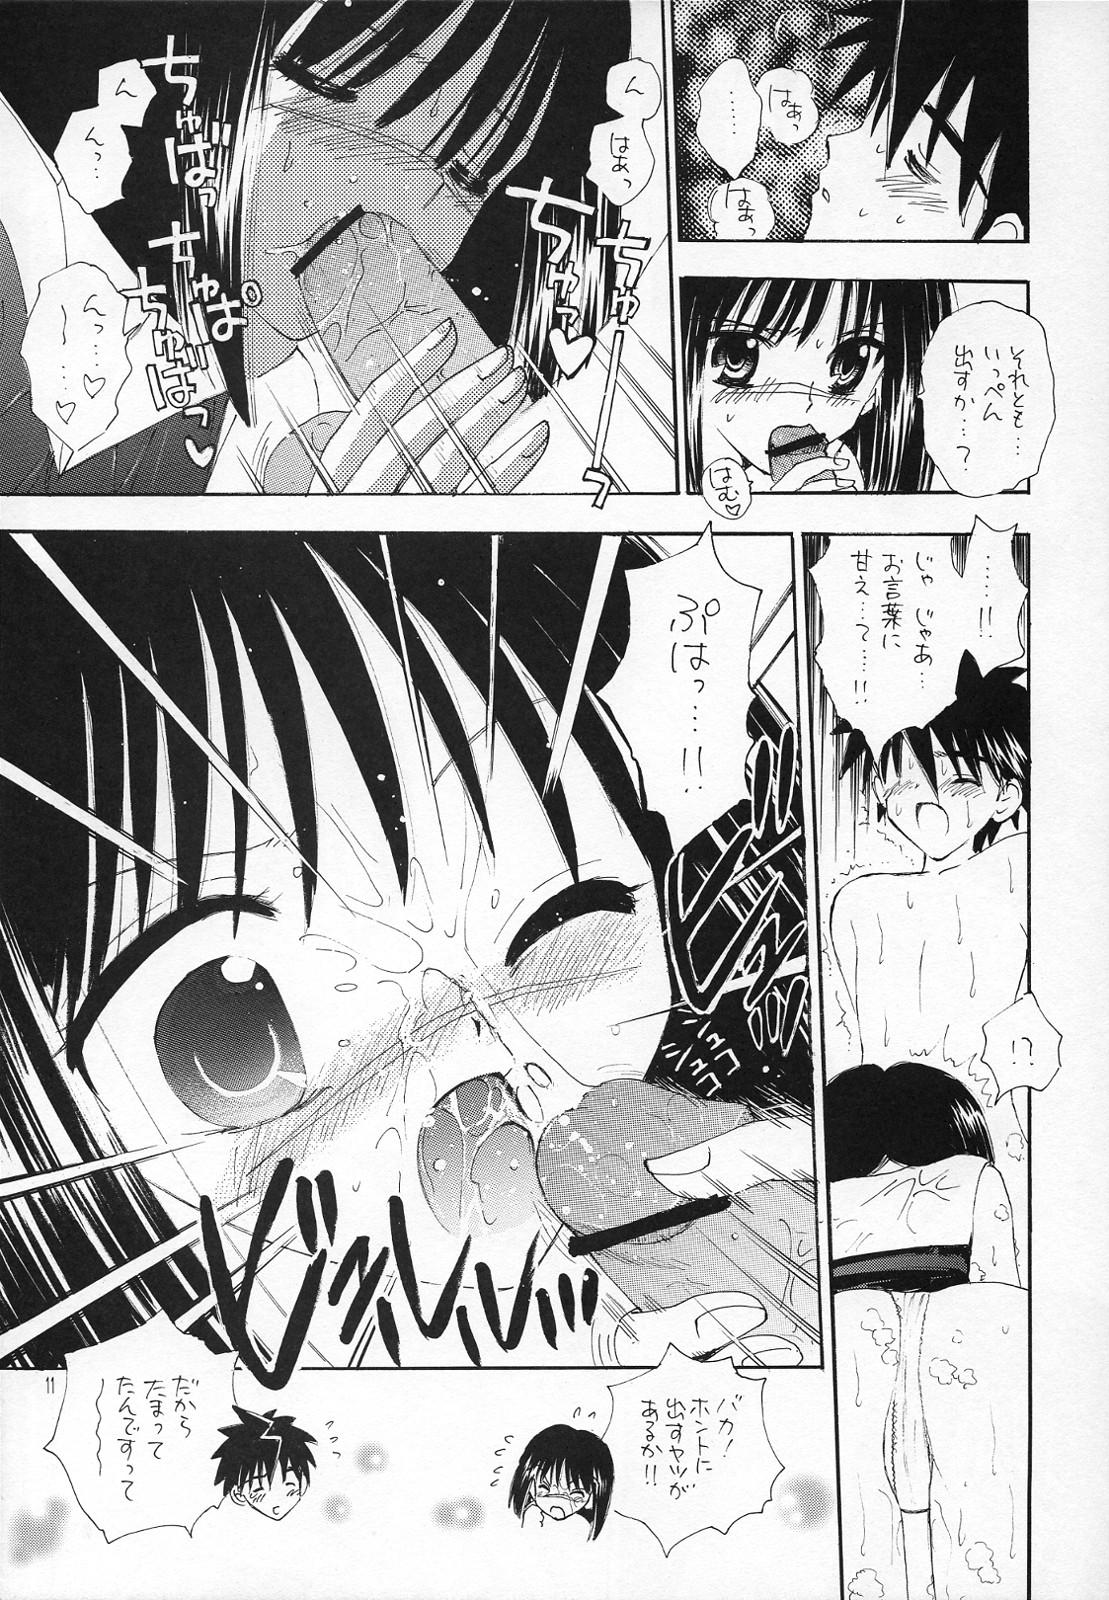 Trimmed while traveling - Busou renkin Hard Core Porn - Page 10